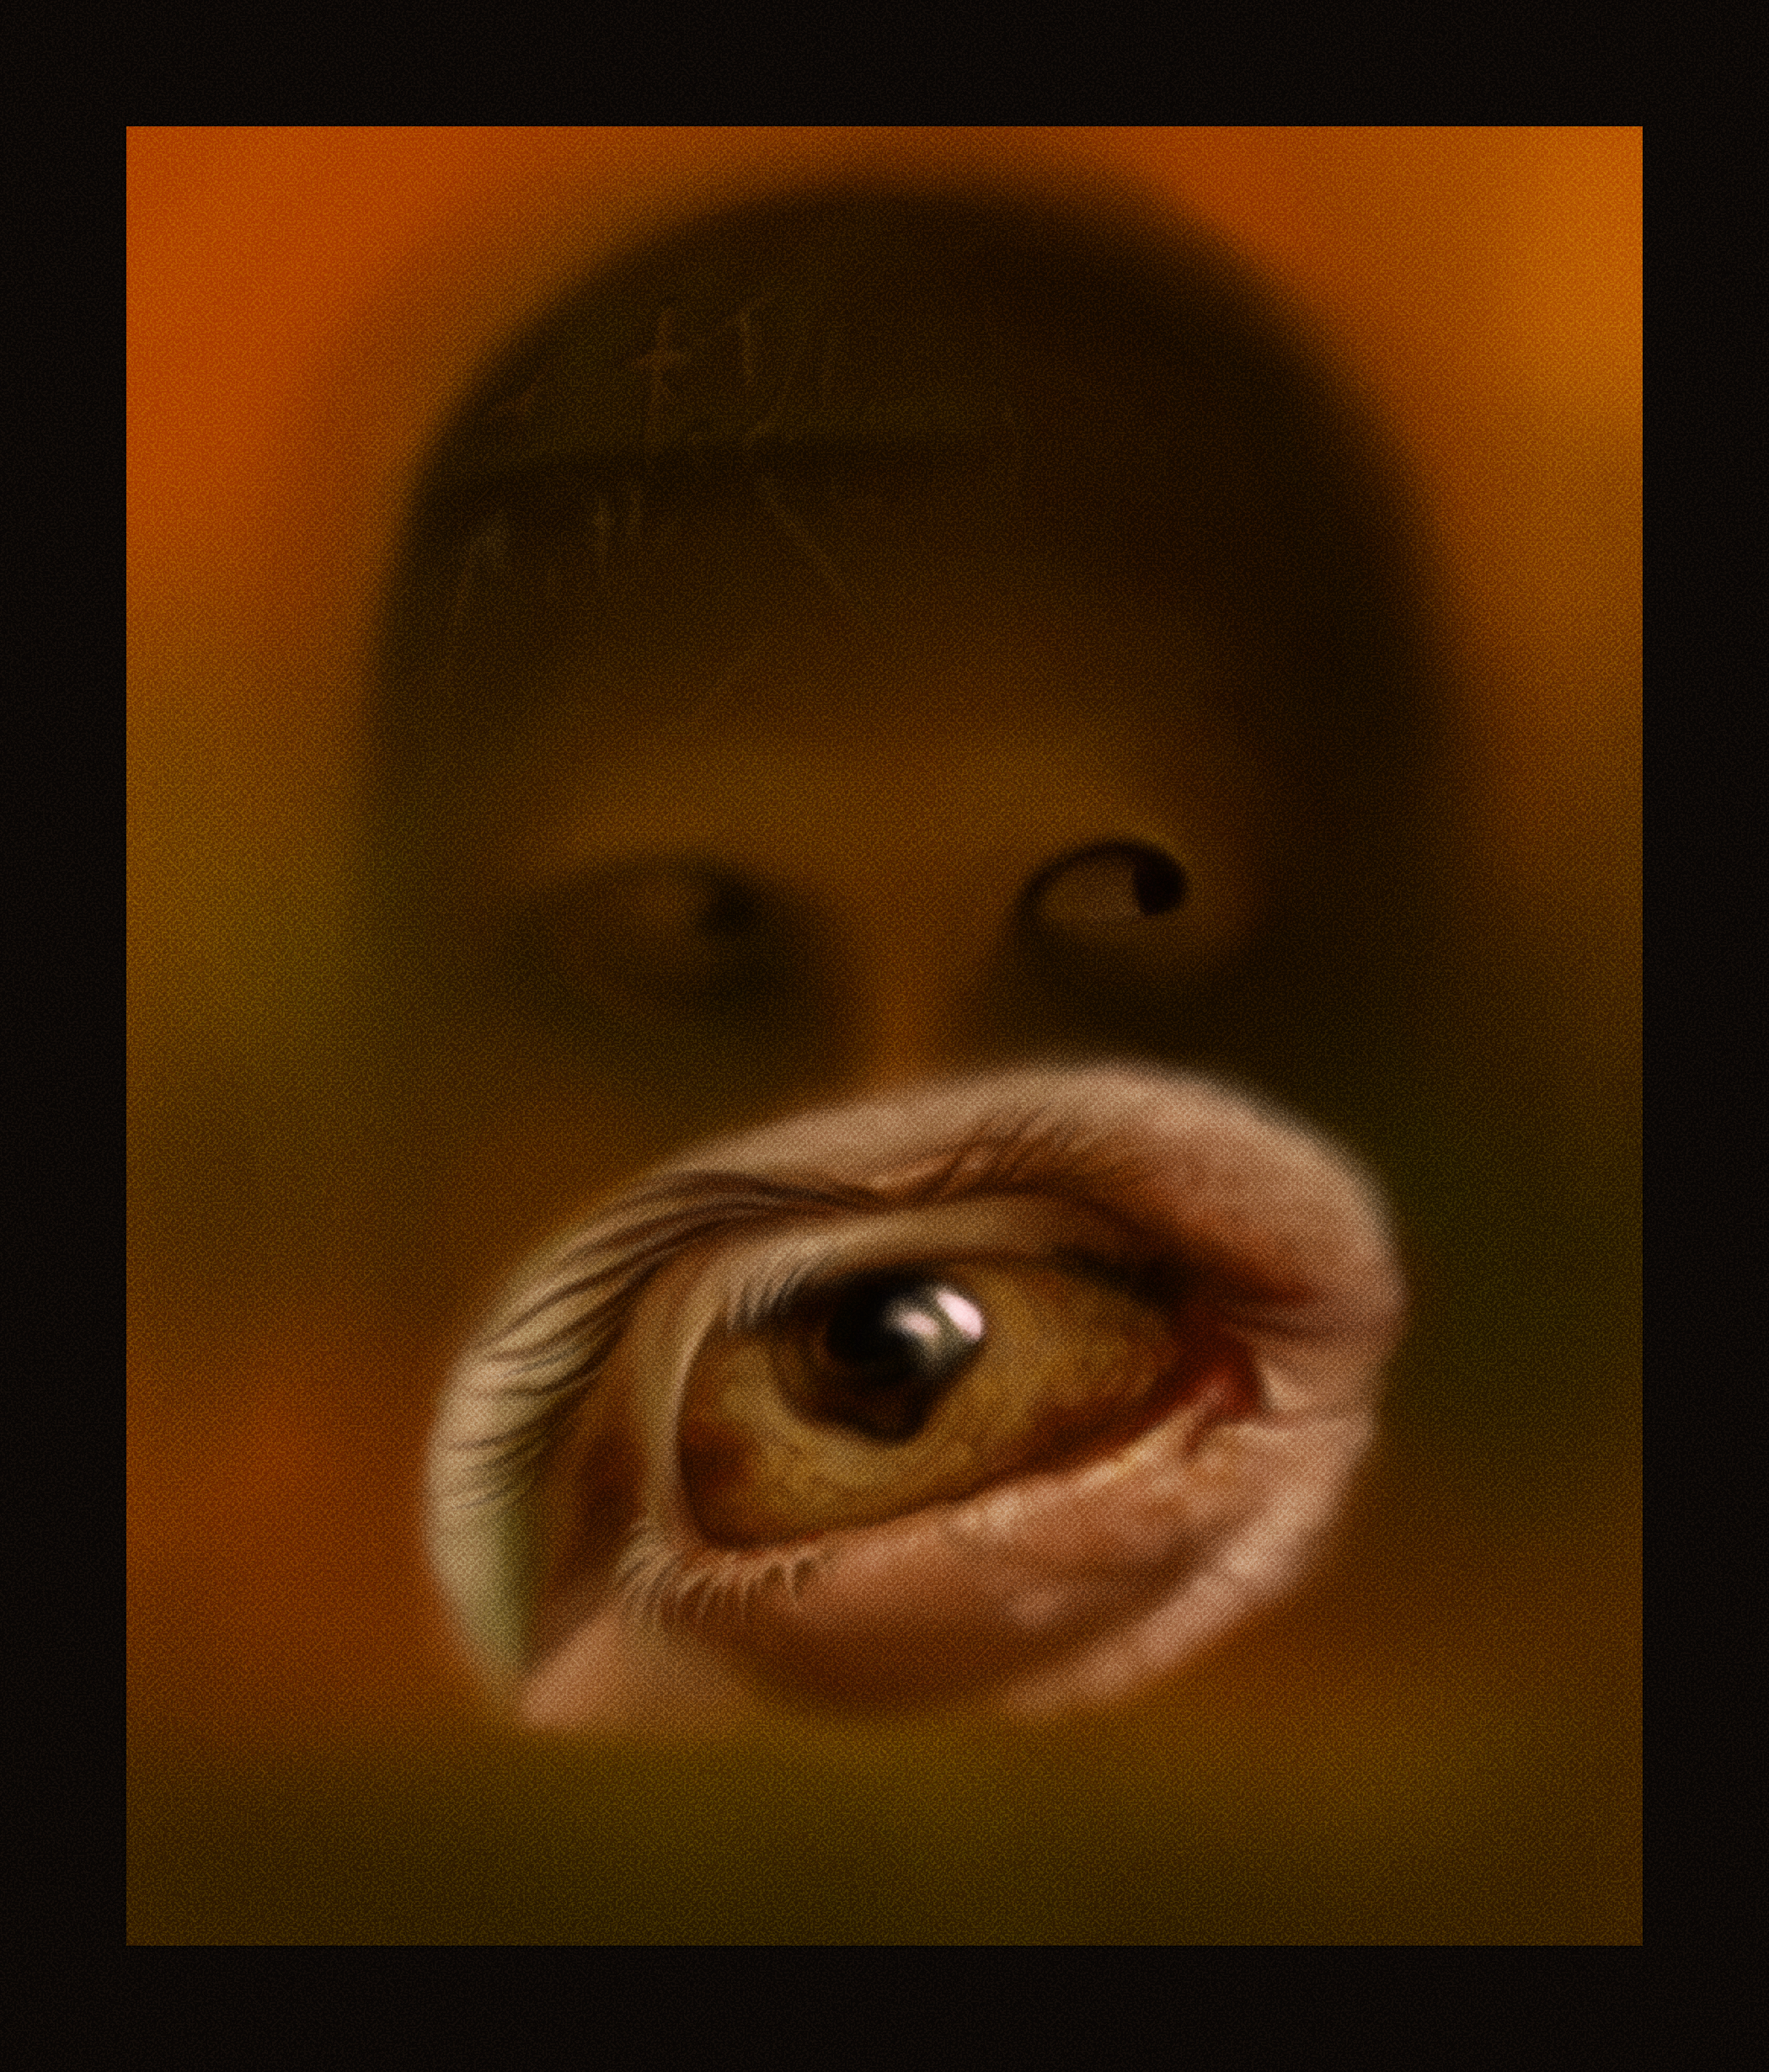 Digital painting of an orange-yellow abstract field with a face hovering on it with few features, and in front of the face is super-imposed a bloodshot eye with strange anatomy. The whole image has a black border around it